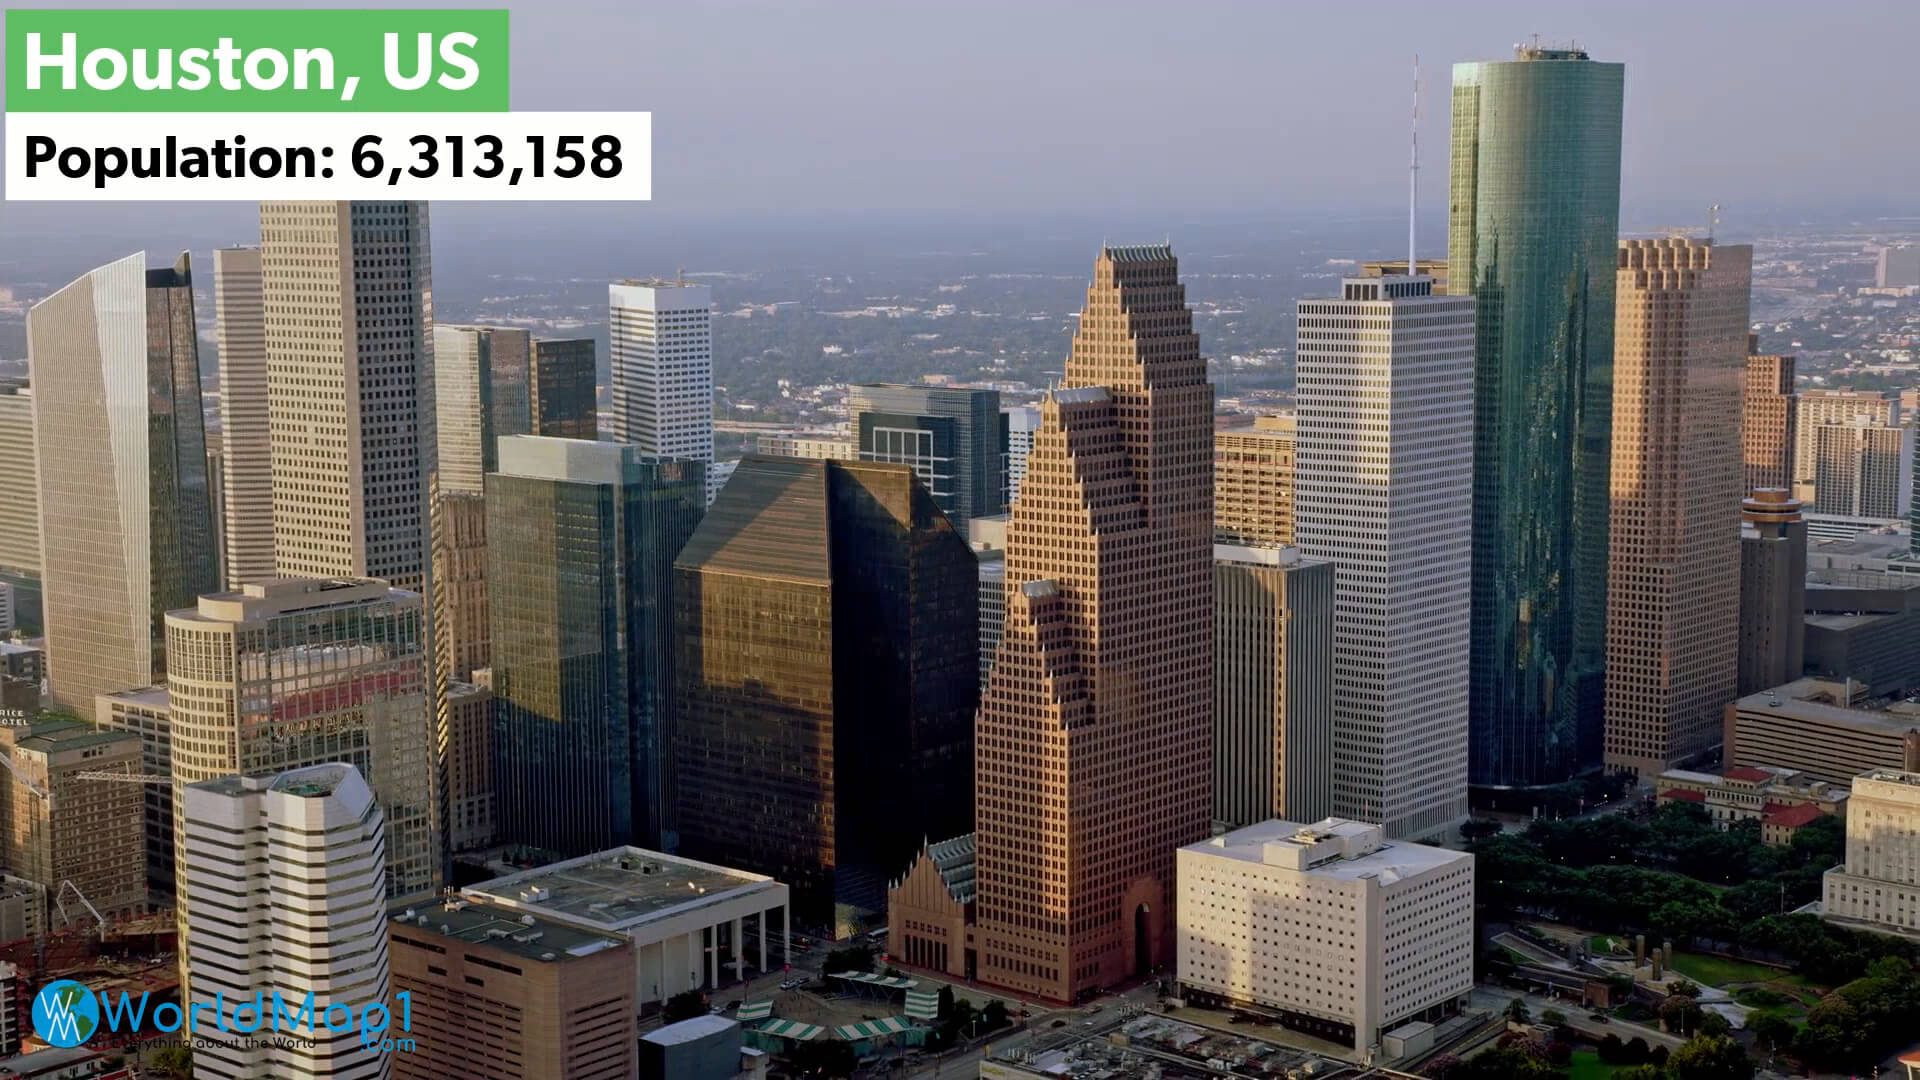 Houston Texas Aerial View and Population